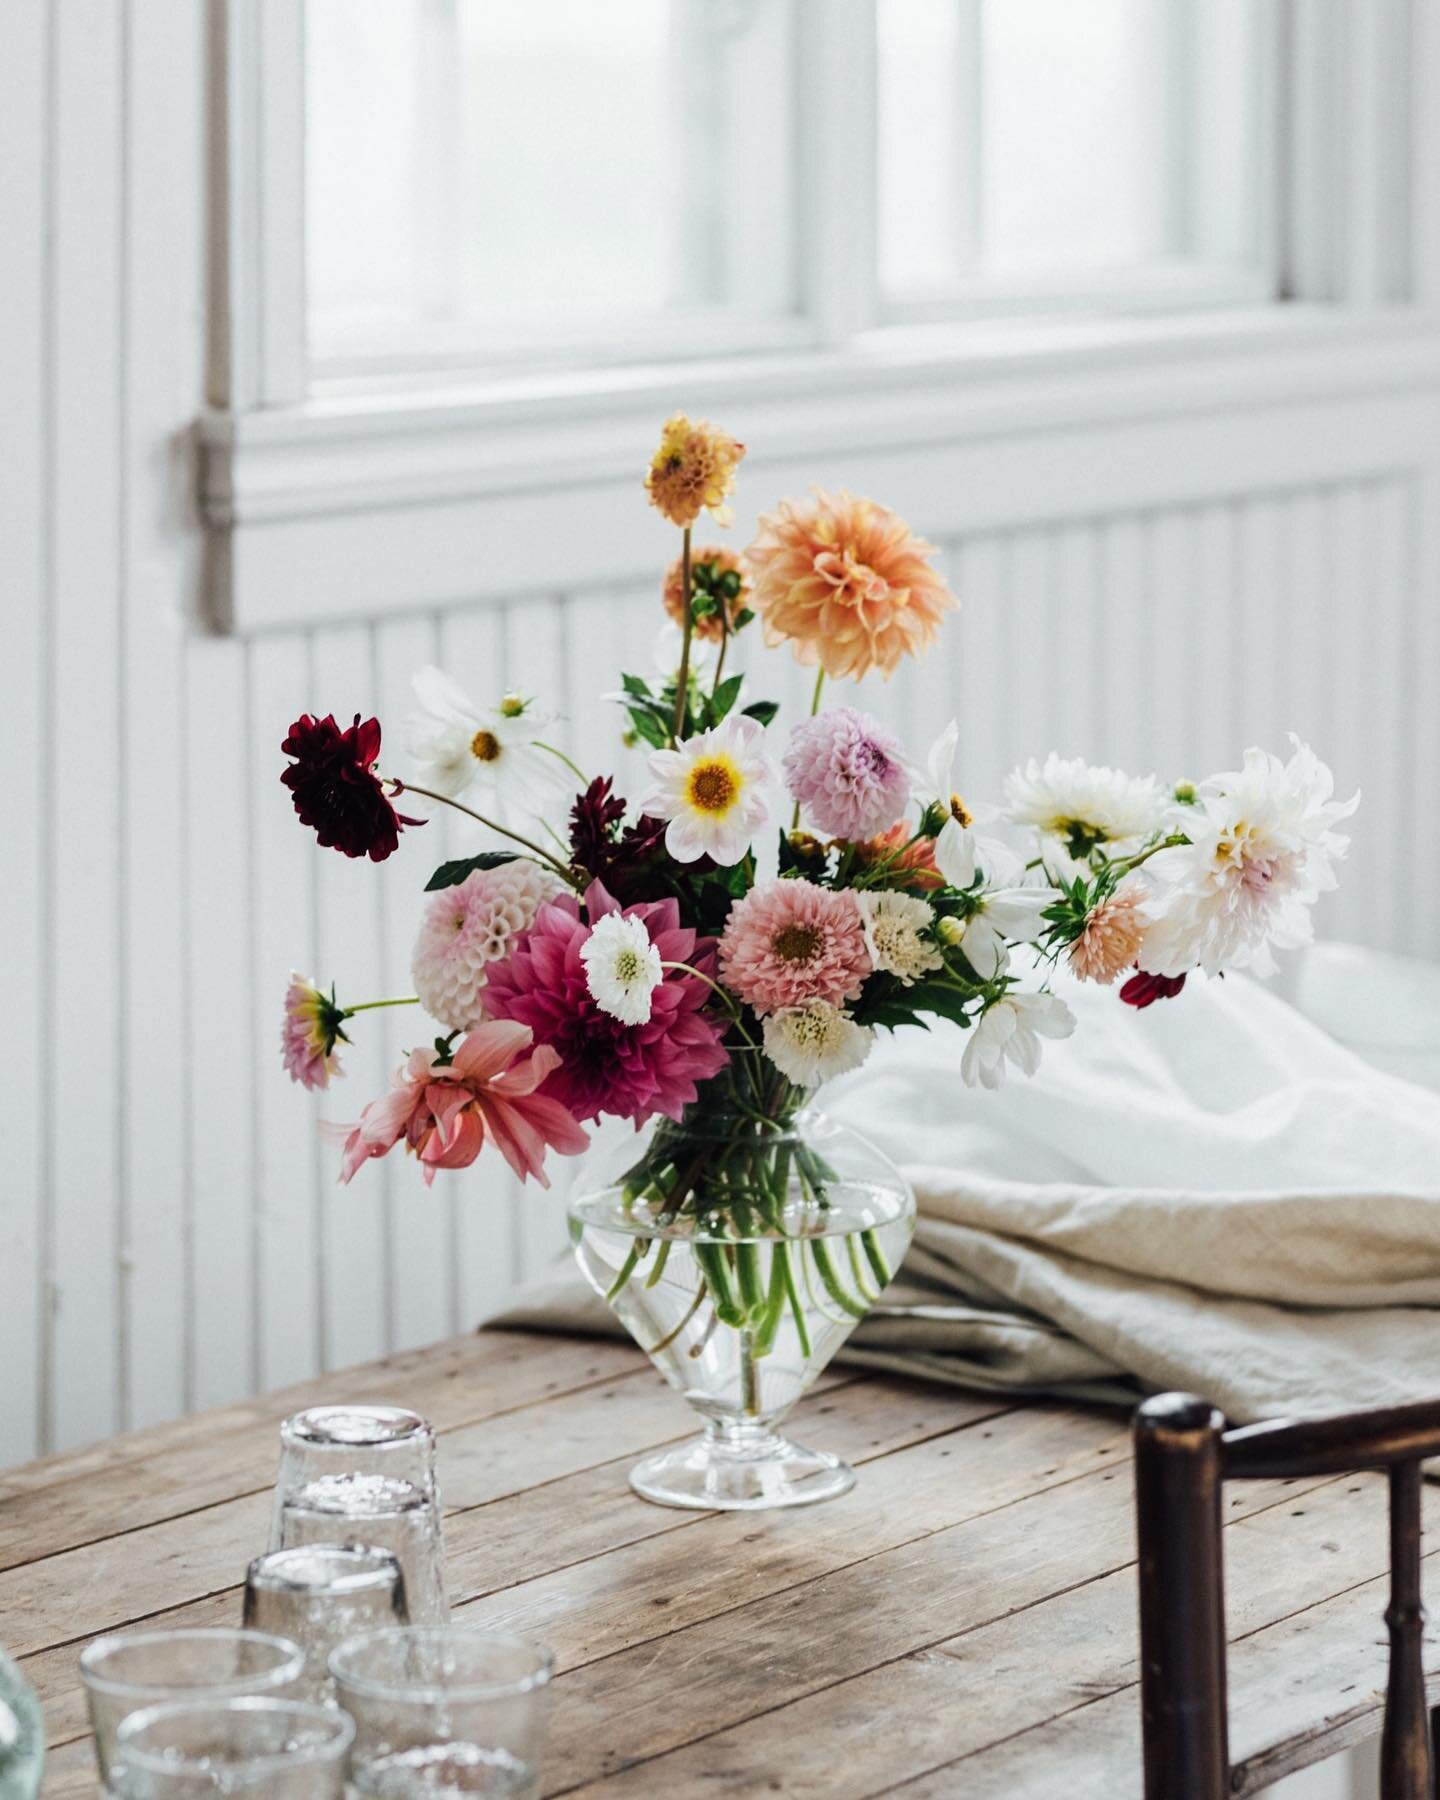 Monday morning, a new week of hopes and dreams and checklists and to do lists! But first tea and some slow music to kick off this day. So happy that J can go out in the garden and pick a bouquet just like this. Have a good one! #alliseeispretty